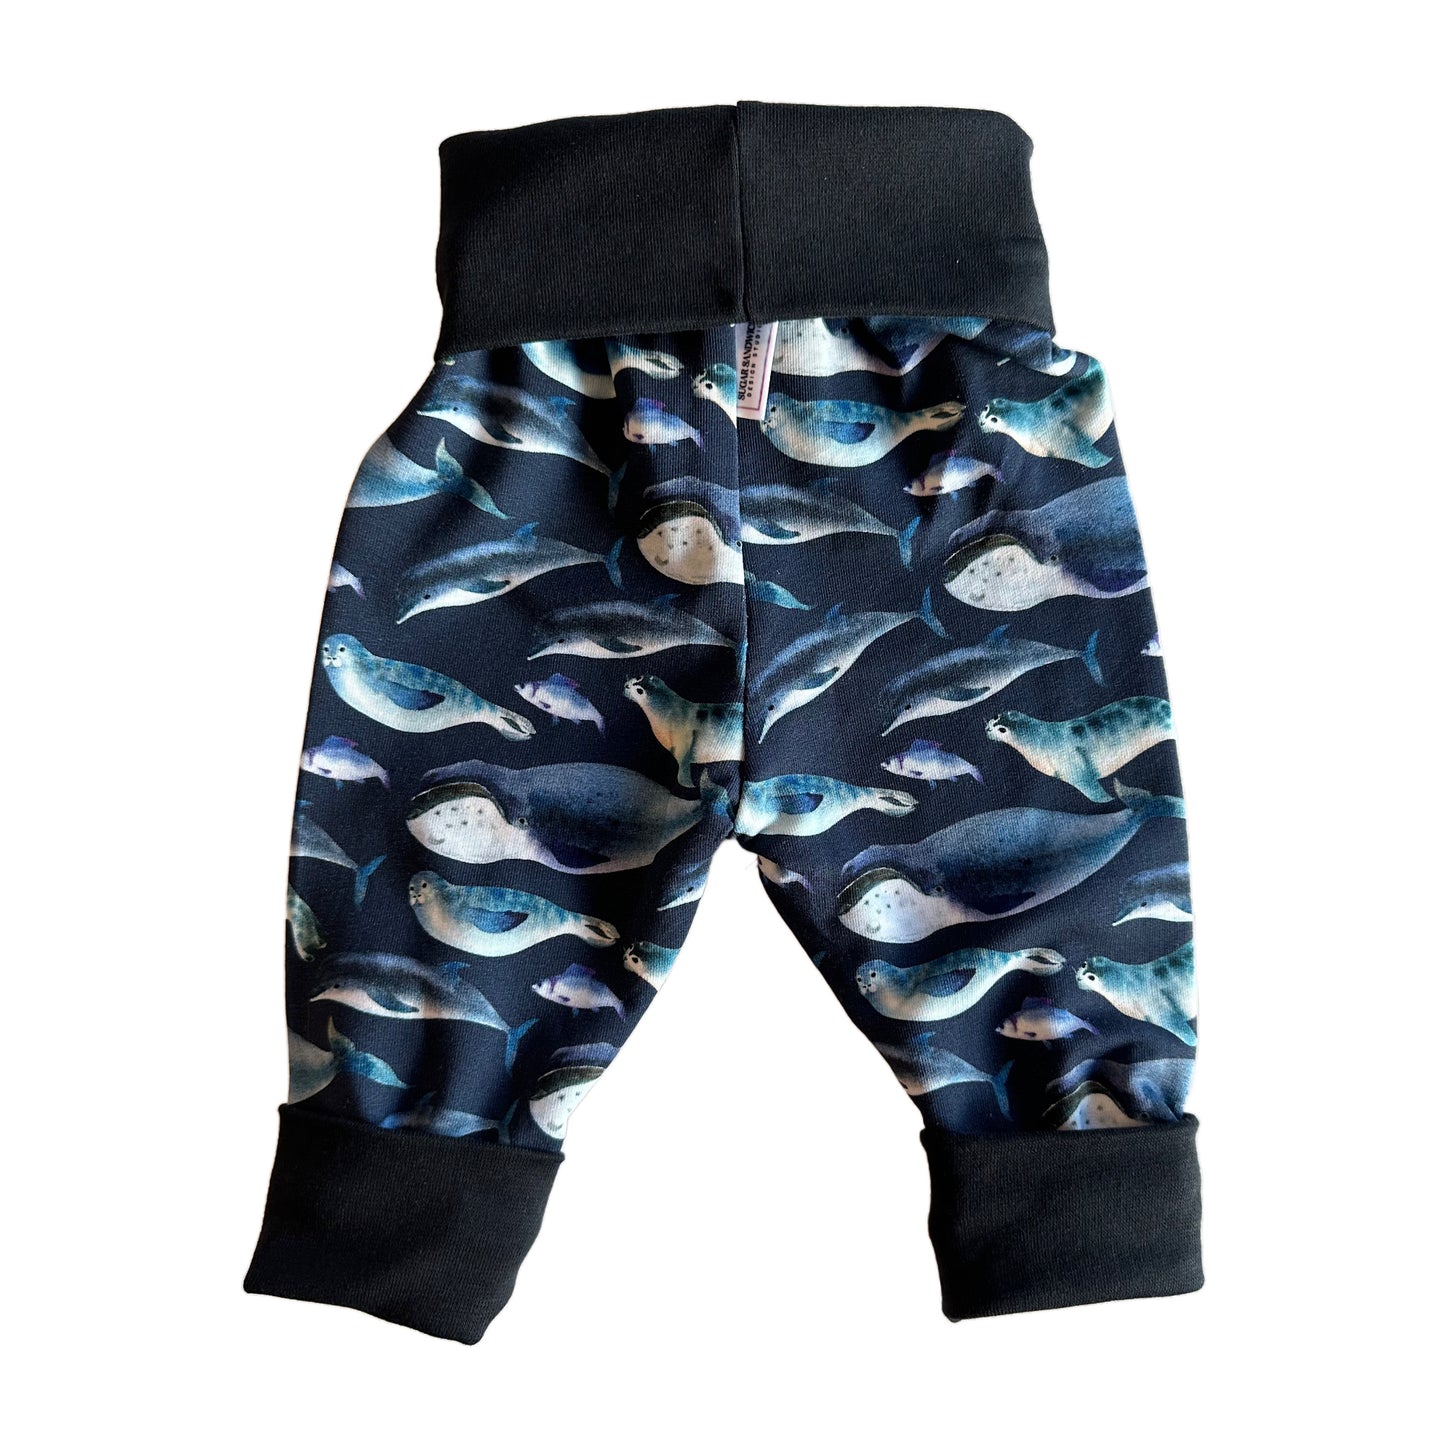 Whales and Seals Growth Spurt Jogger Pants